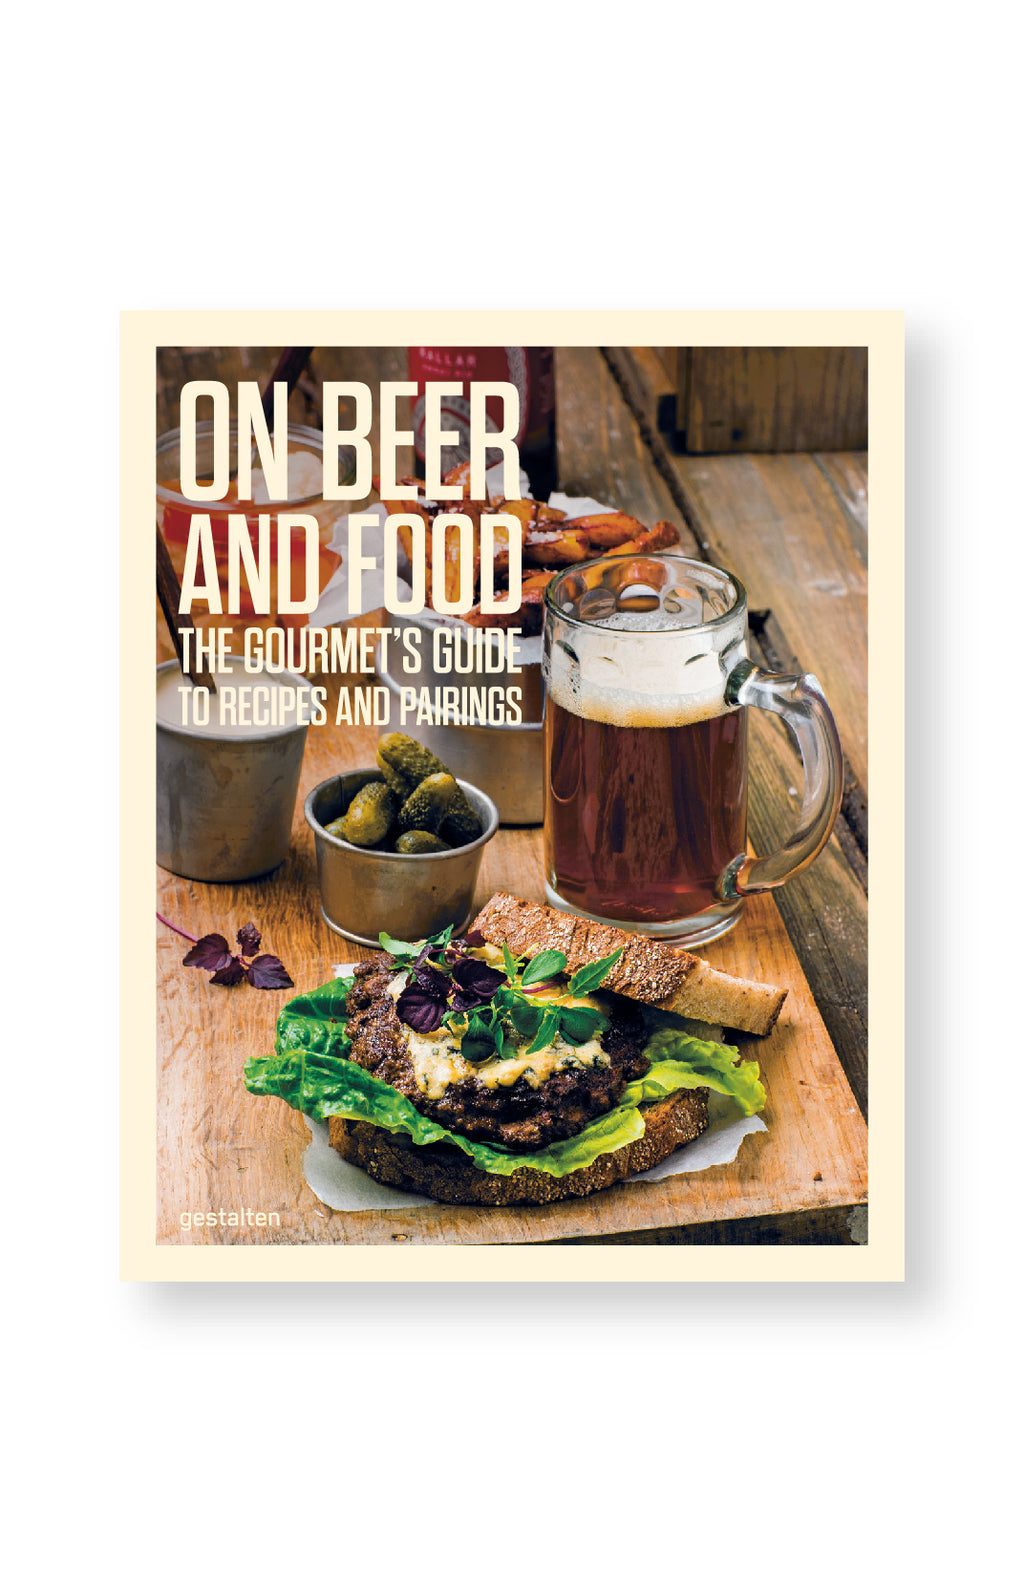 On Beer and Food - The Gourmet's Guide to Recipes and Pairings